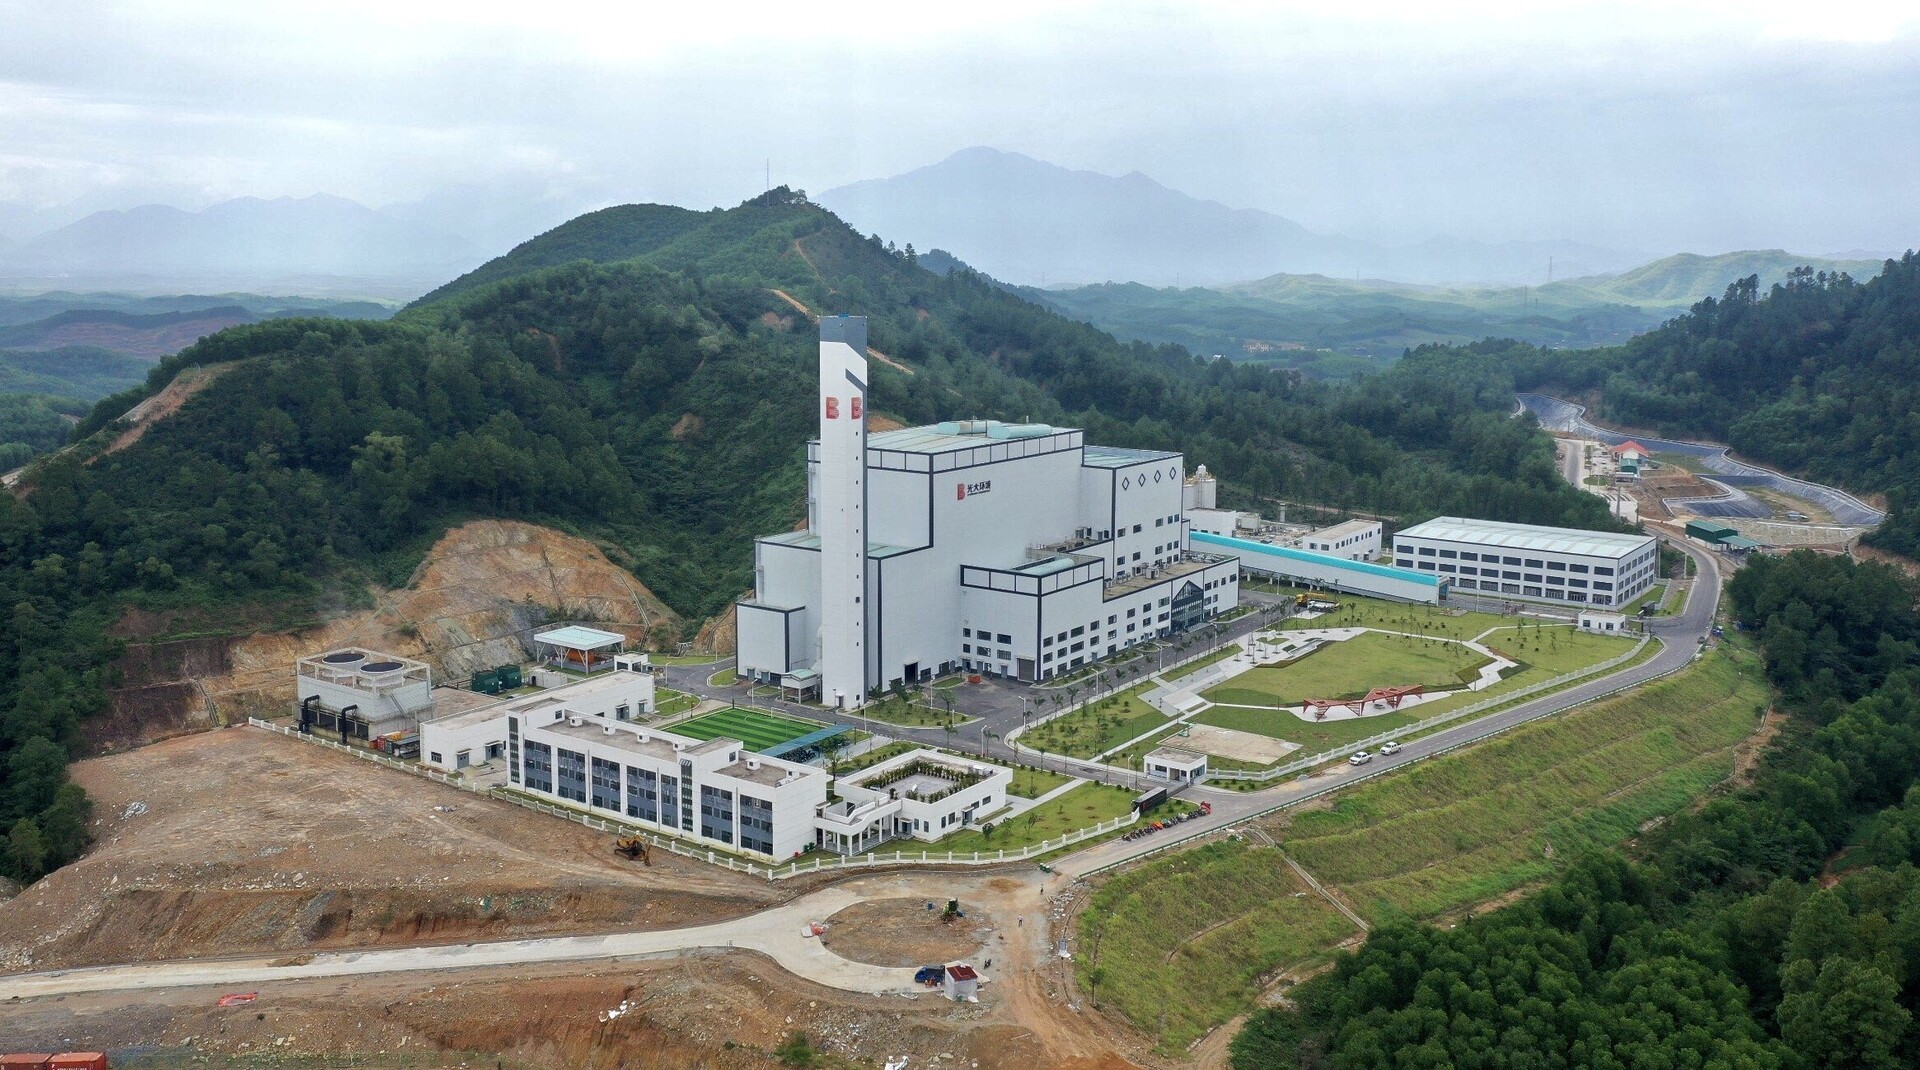 Phu Son waste-to-power plant in Thua Thien-Hue province, central Vietnam. Photo courtesy of Thua Thien-Hue newspaper.